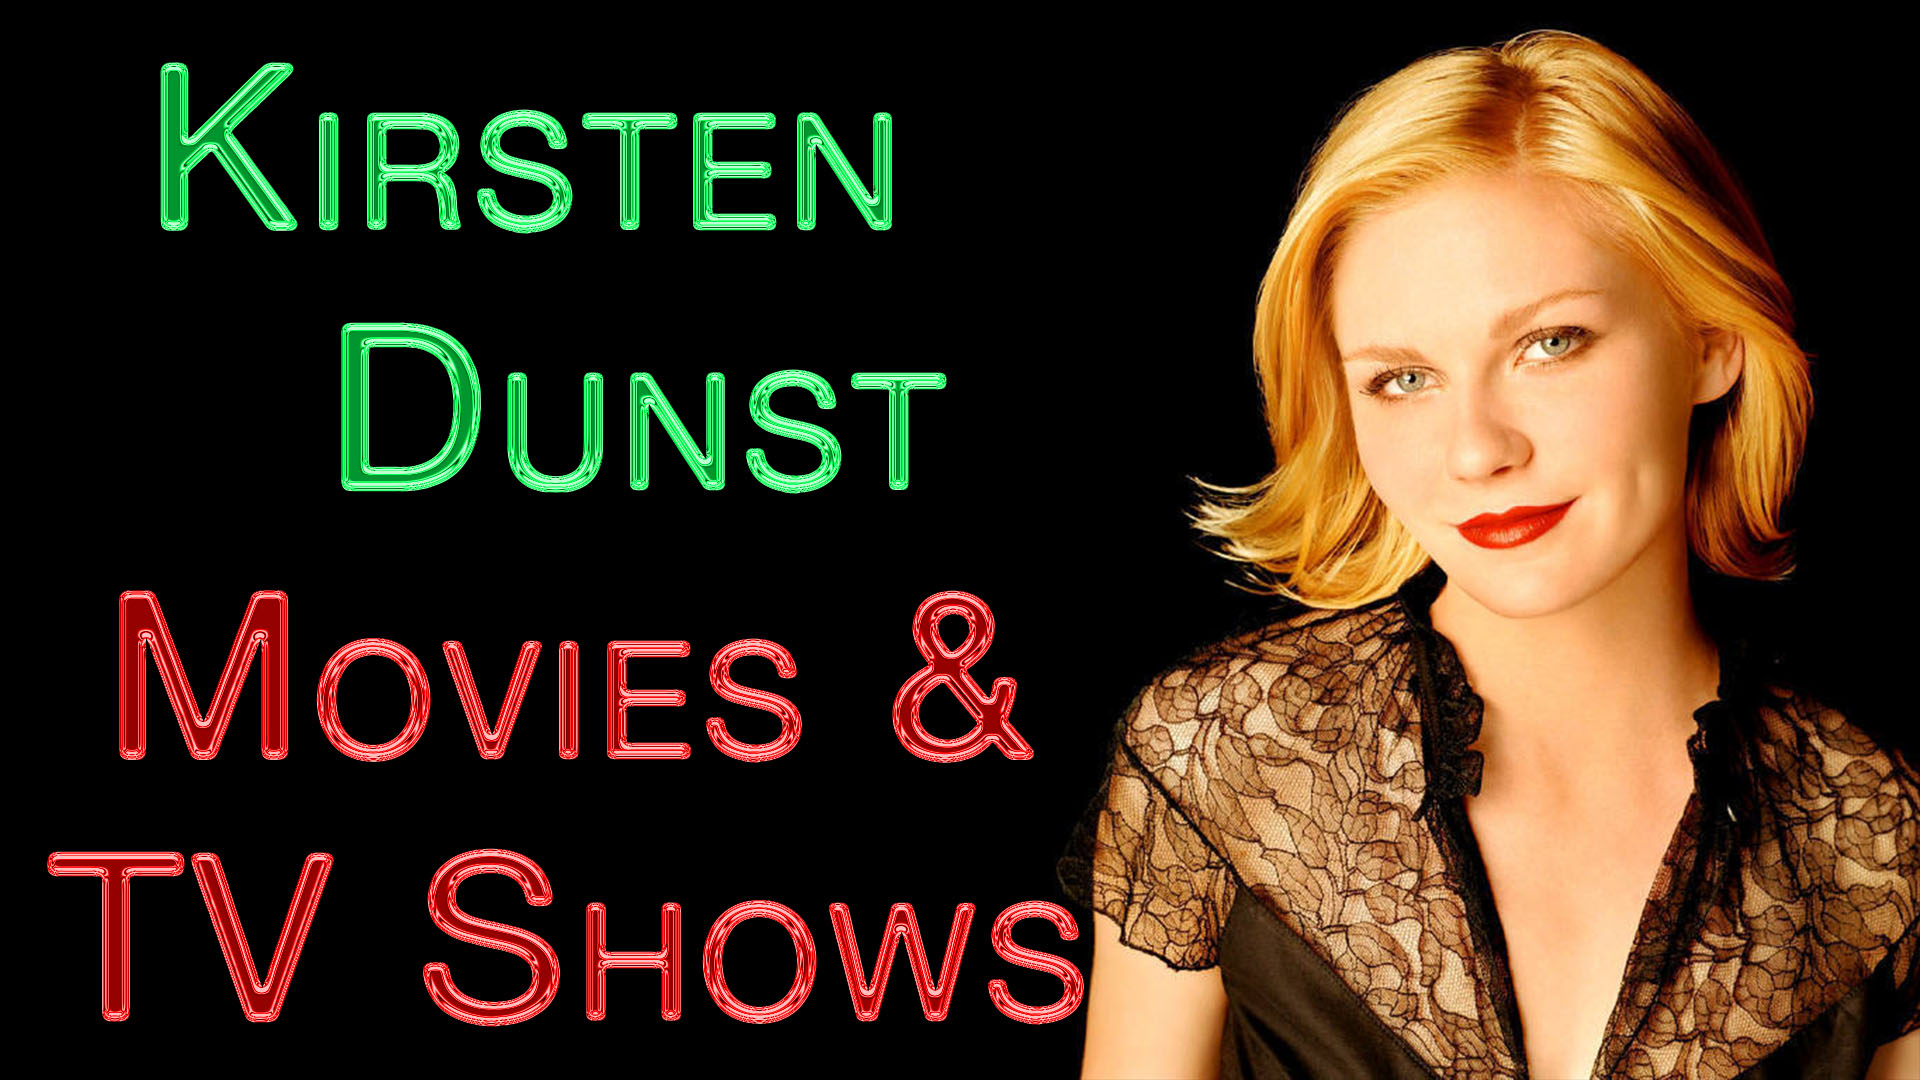 Kirsten Dunst All Movies and TV Shows Complete list 2021 check here